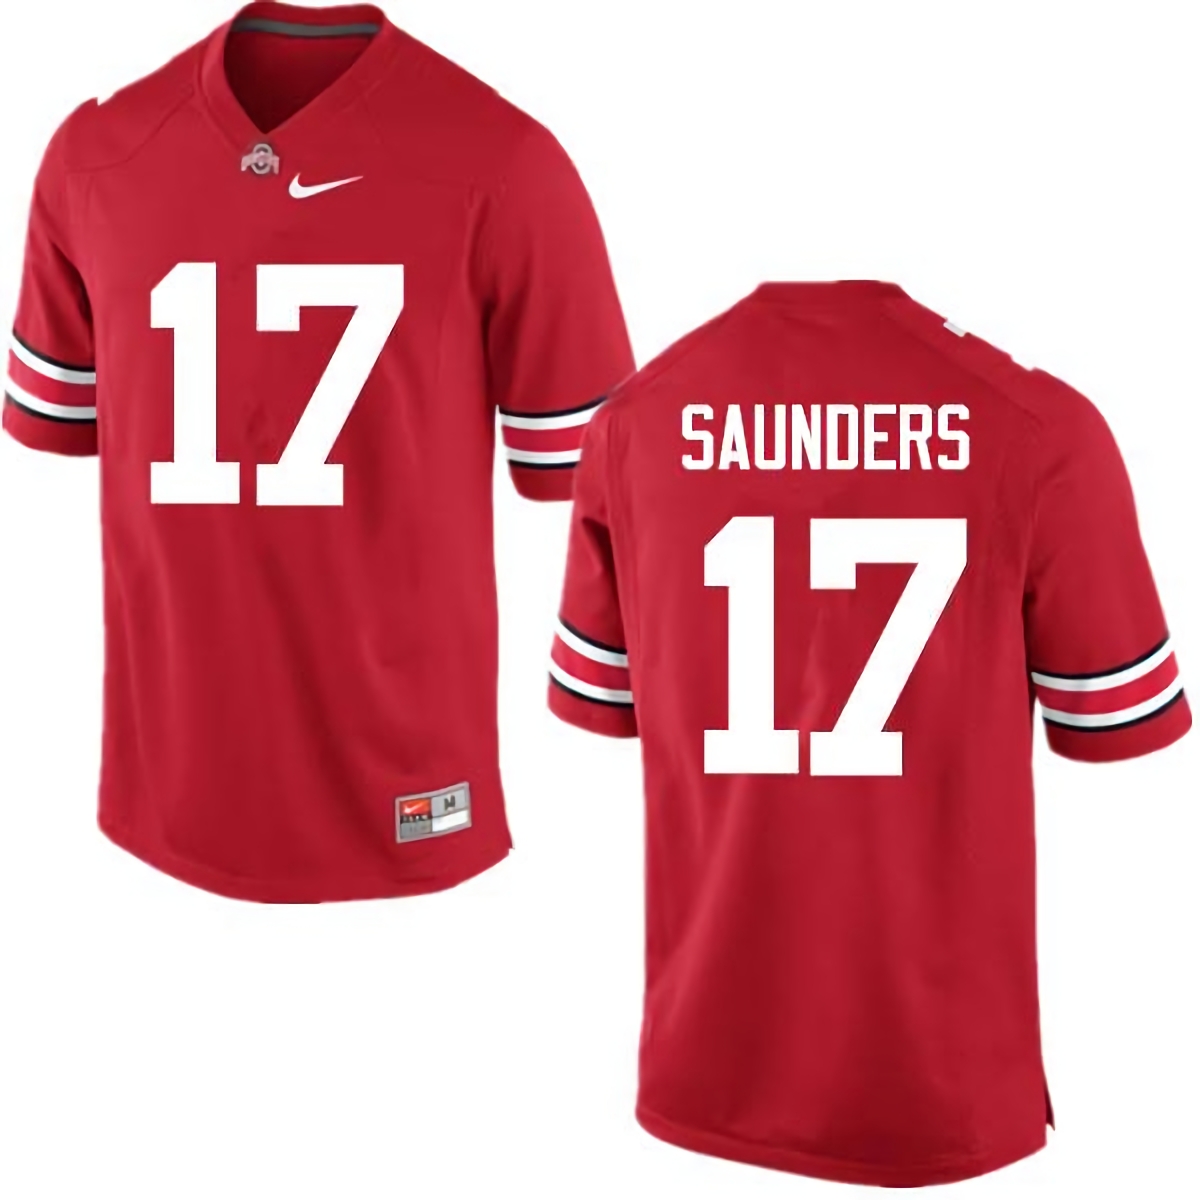 C.J. Saunders Ohio State Buckeyes Men's NCAA #17 Nike Red College Stitched Football Jersey OFT5056KA